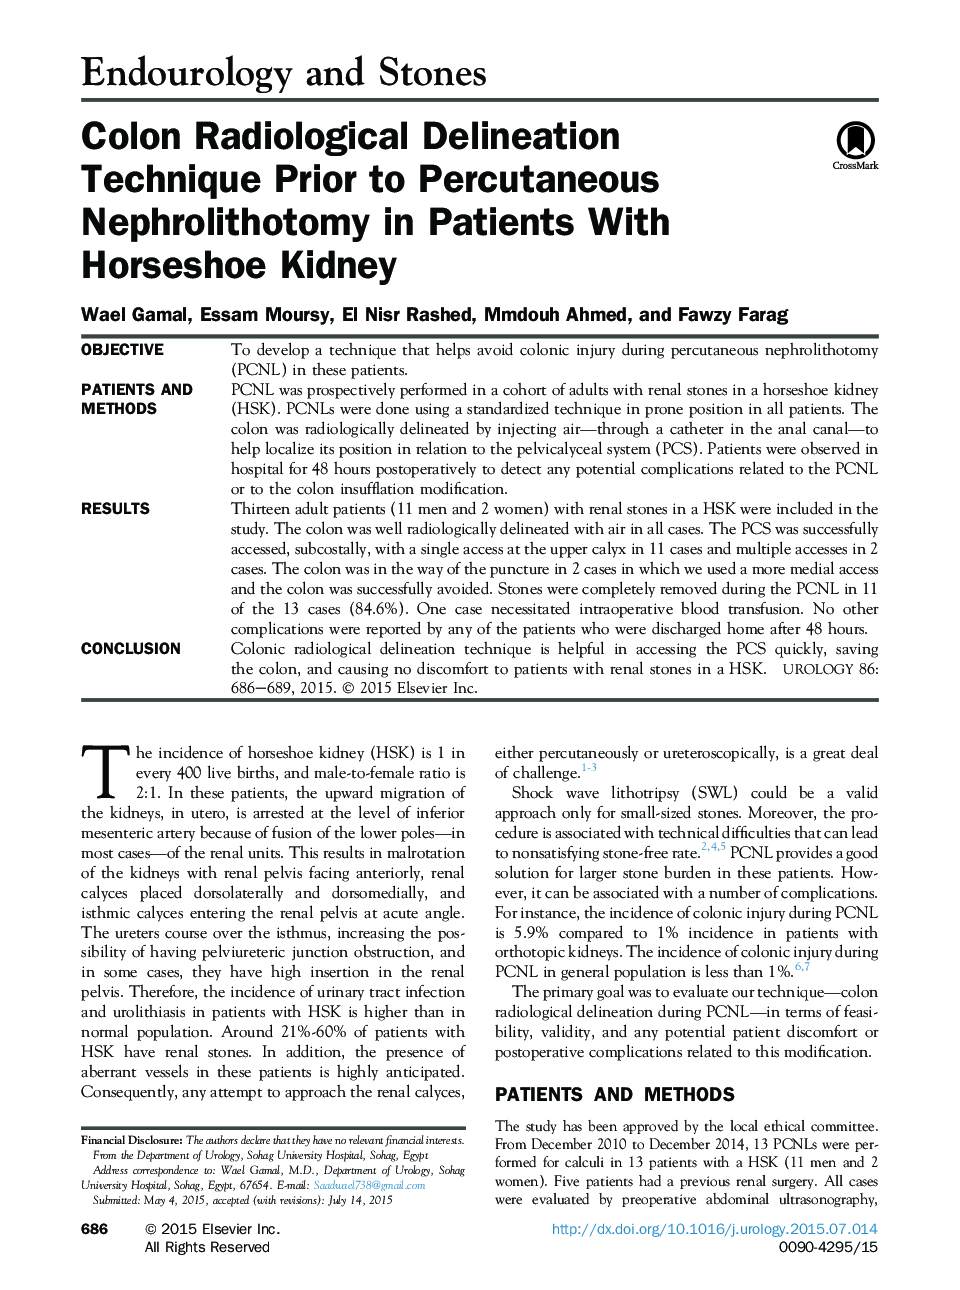 Colon Radiological Delineation Technique Prior to Percutaneous Nephrolithotomy in Patients With Horseshoe Kidney